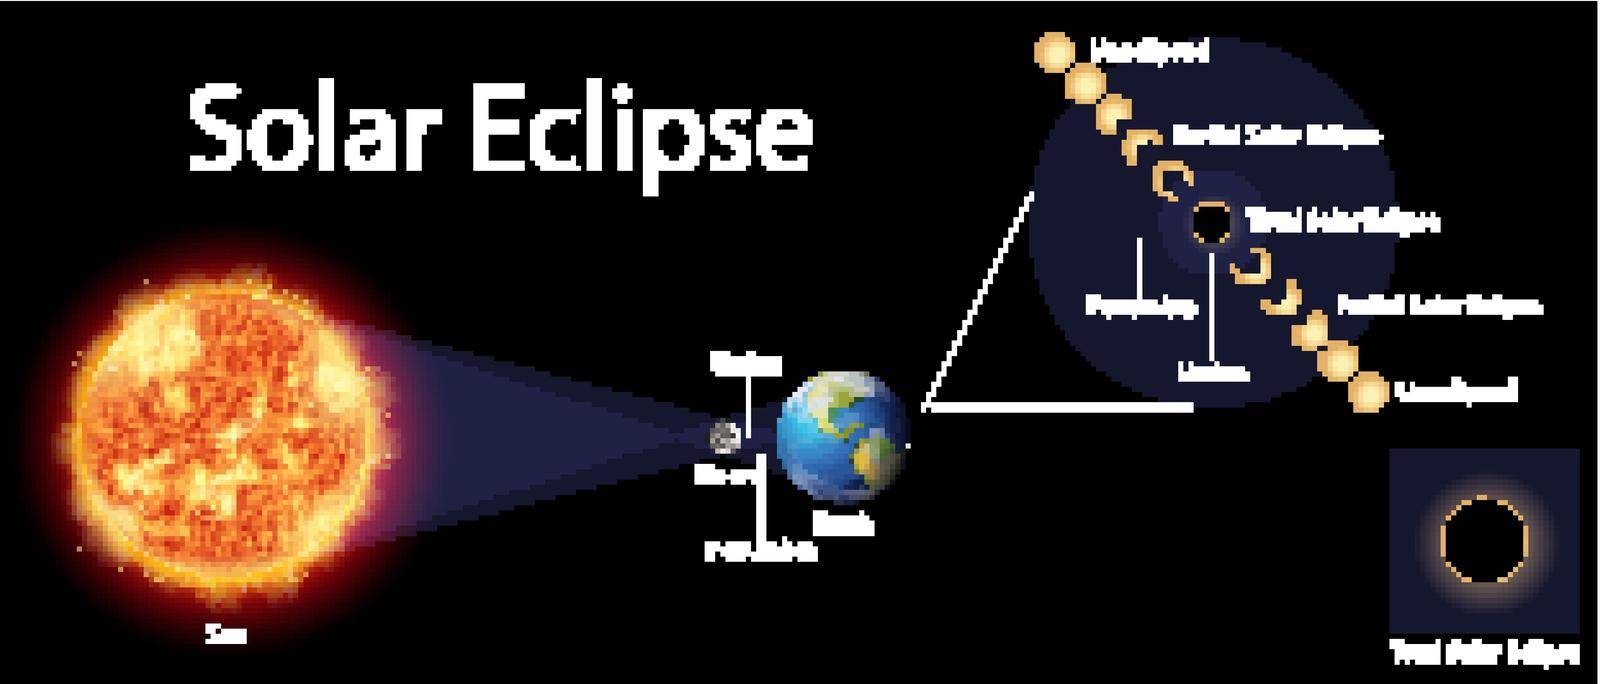 Diagram showing solar eclipse on earth by iimages